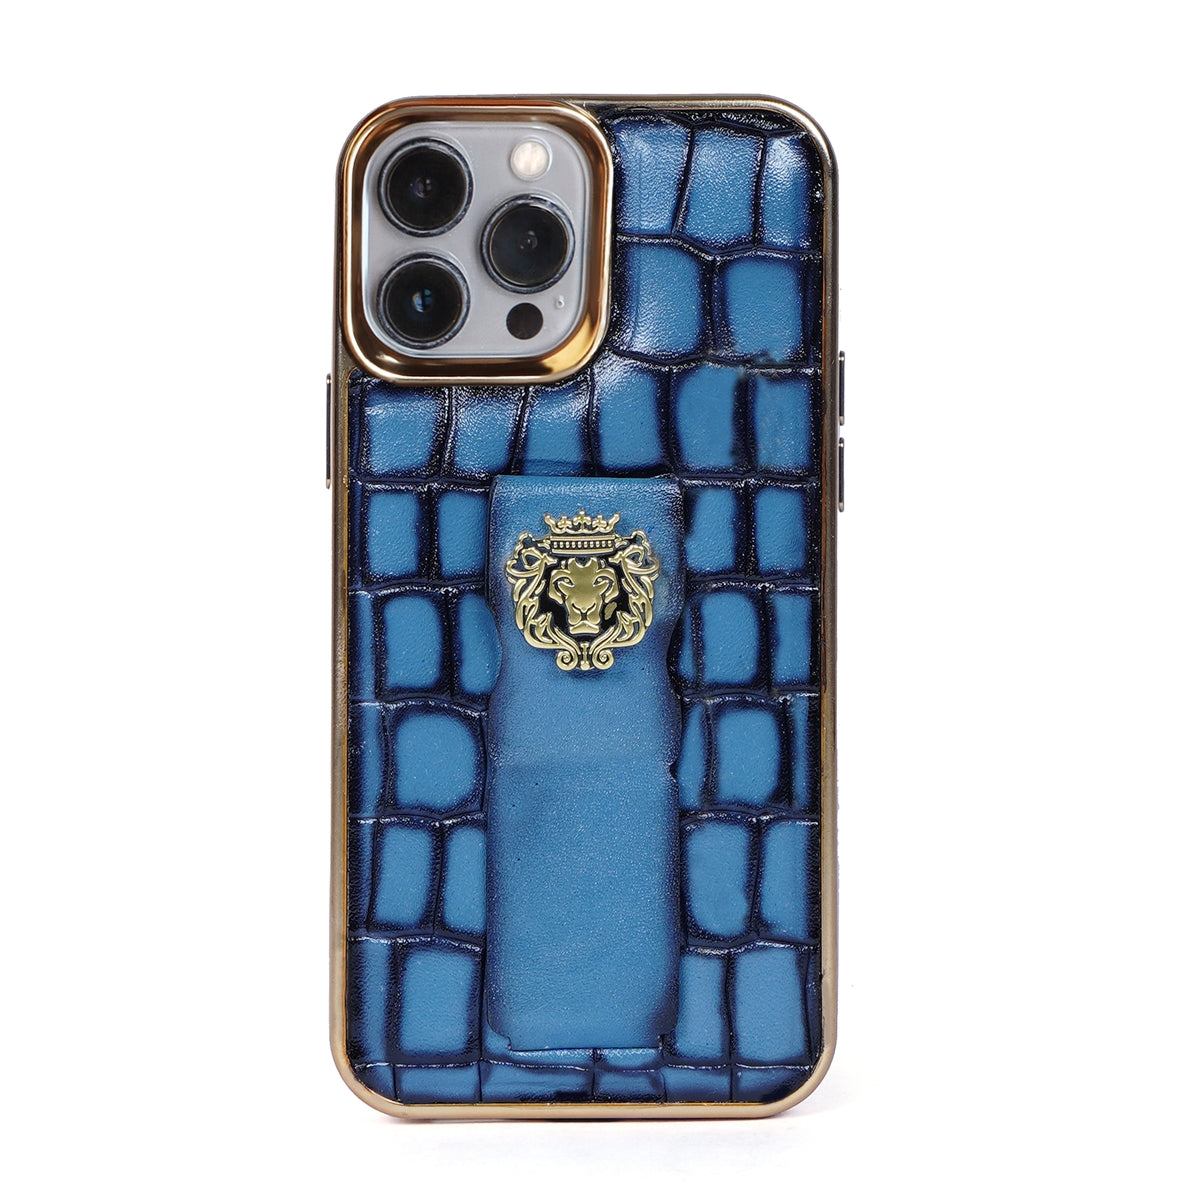 Sky Blue Leather Mobile Cover Golden Rim Finger Strap Cum Stand iPhone Series Deep Cut Croco Textured With Golden Lion Logo By Brune & Bareskin